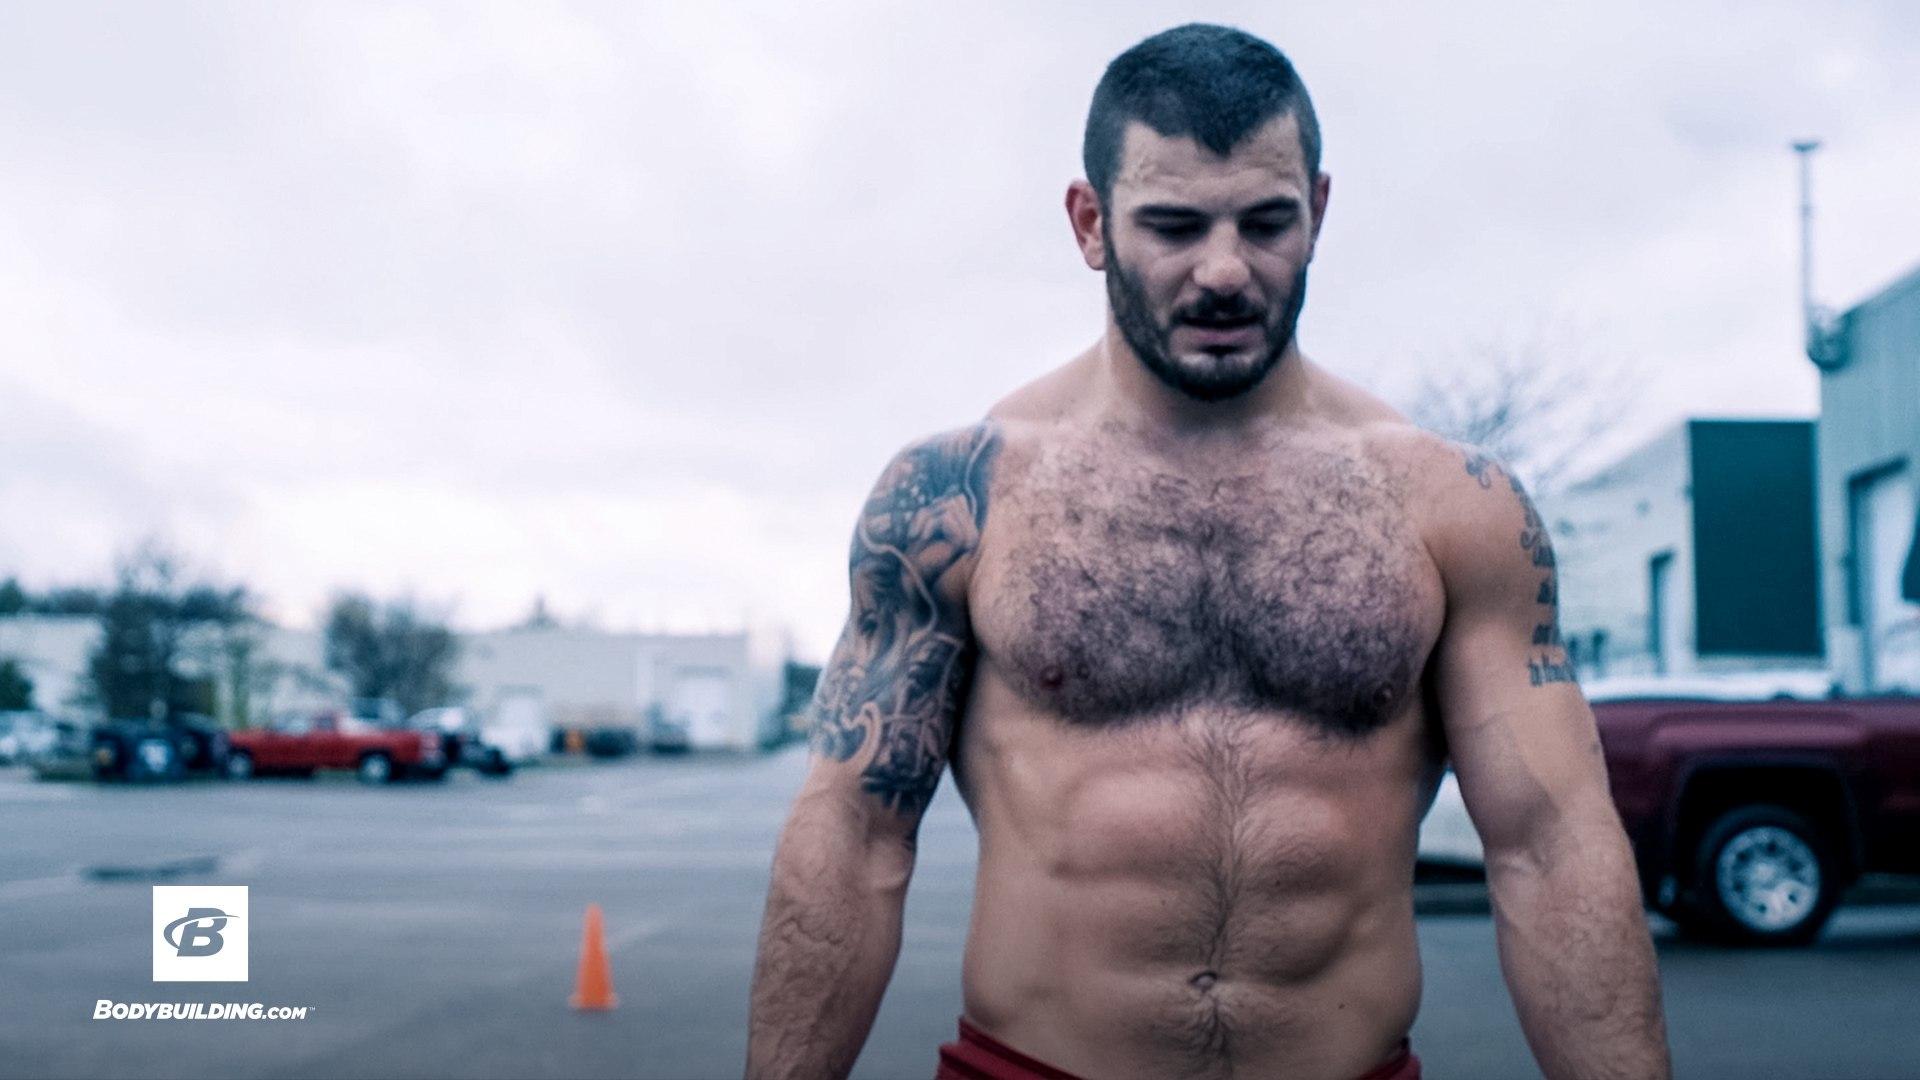 Coffee, Motorcycles, Guns, & CrossFit. Mat Fraser: The Making of a Champion